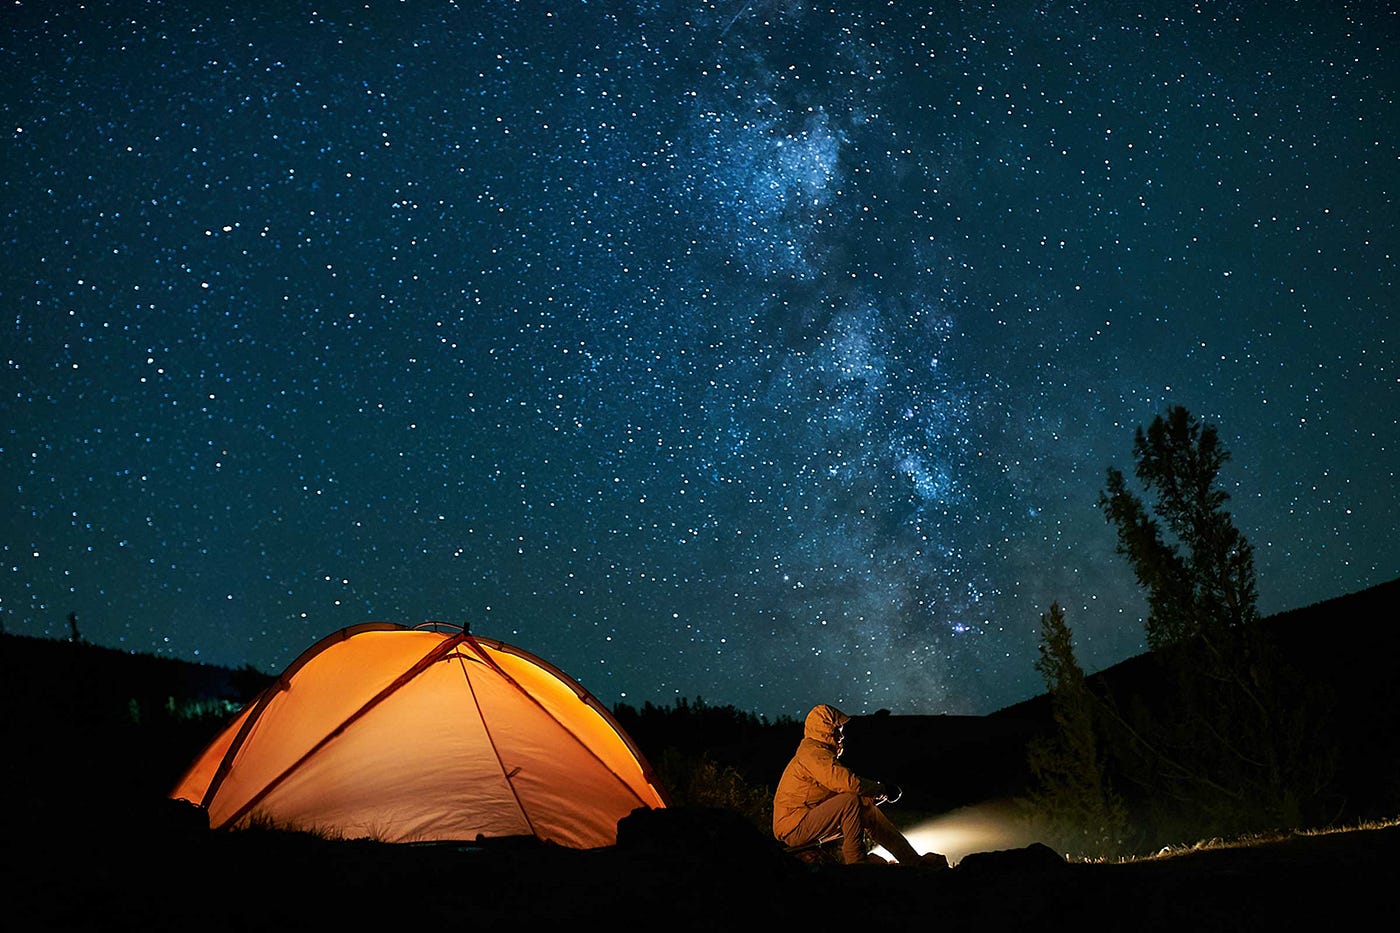 Camping Under The Stars: 6 Tips For An Unforgettable Night in Nature